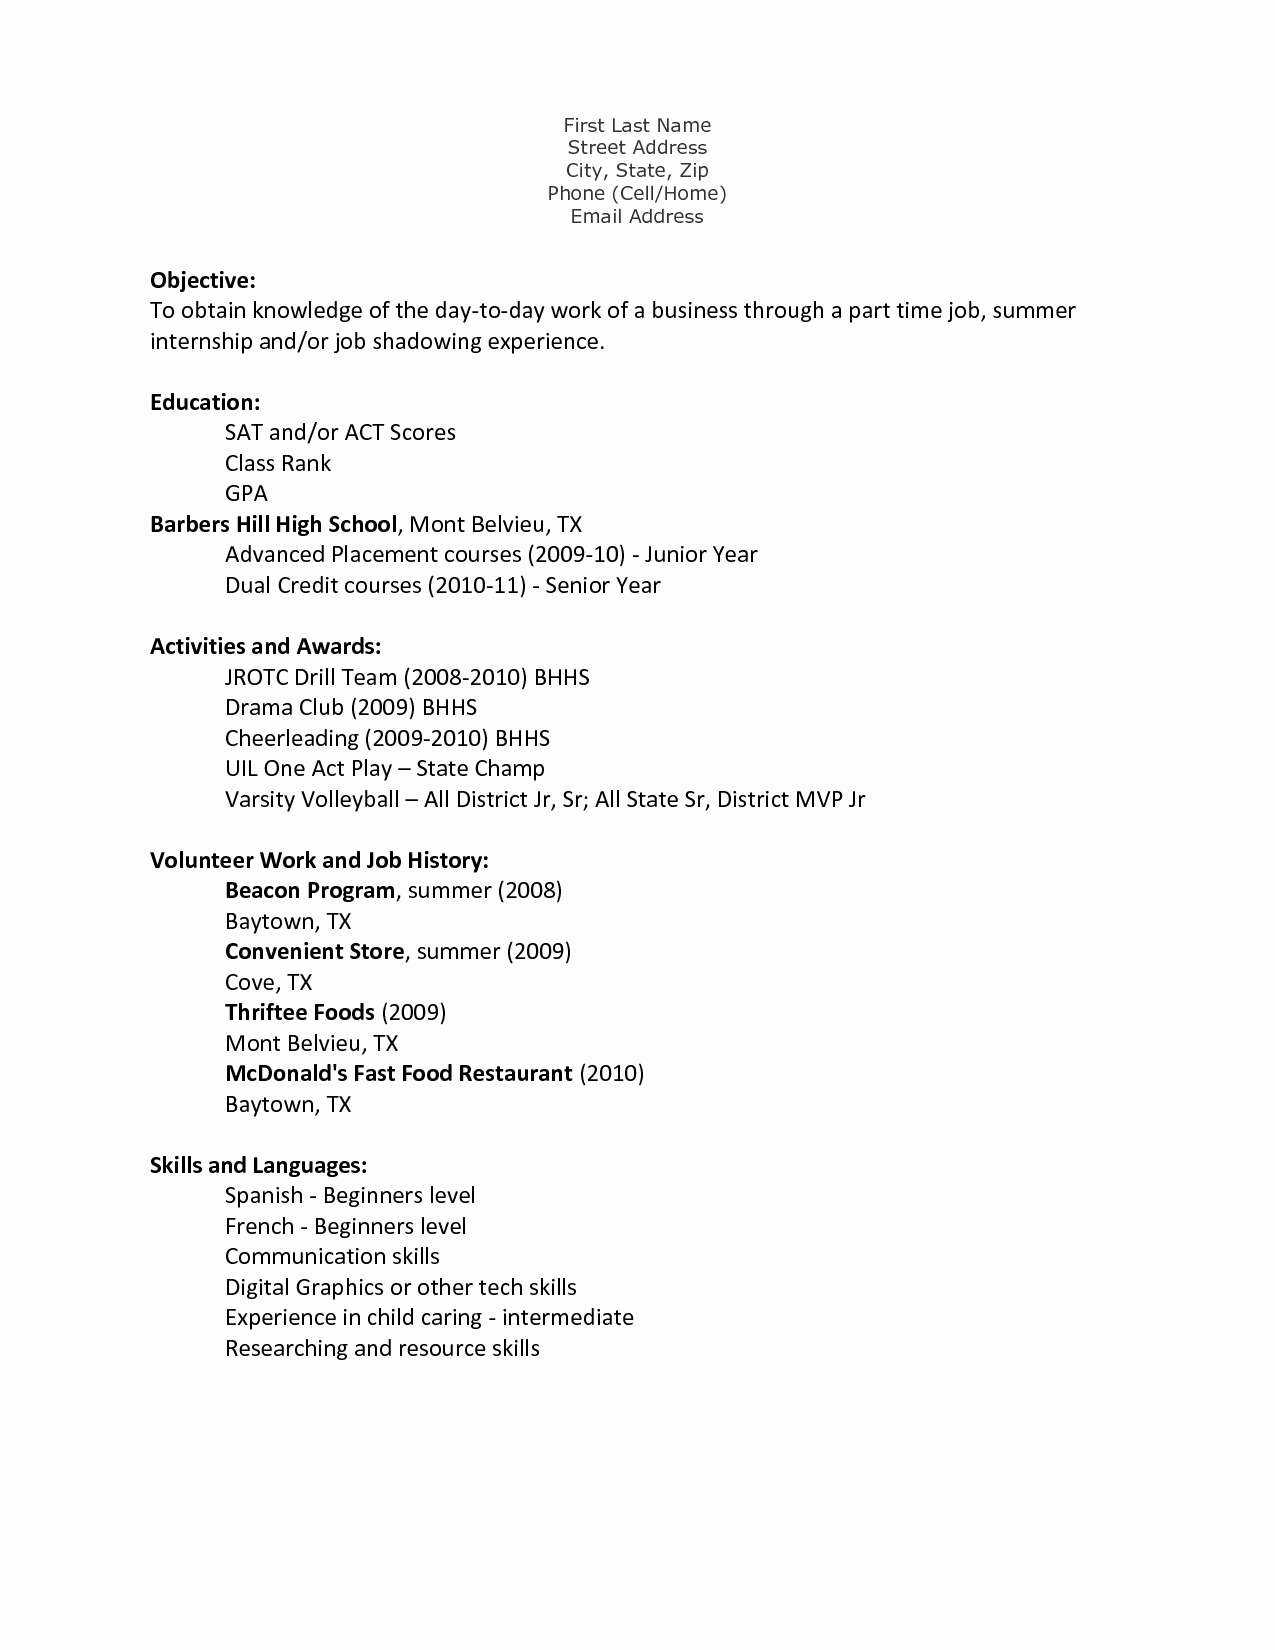 First Time Resume Templates | Summary For Resume – Kcdrwebshop Within First Time Resume Templates